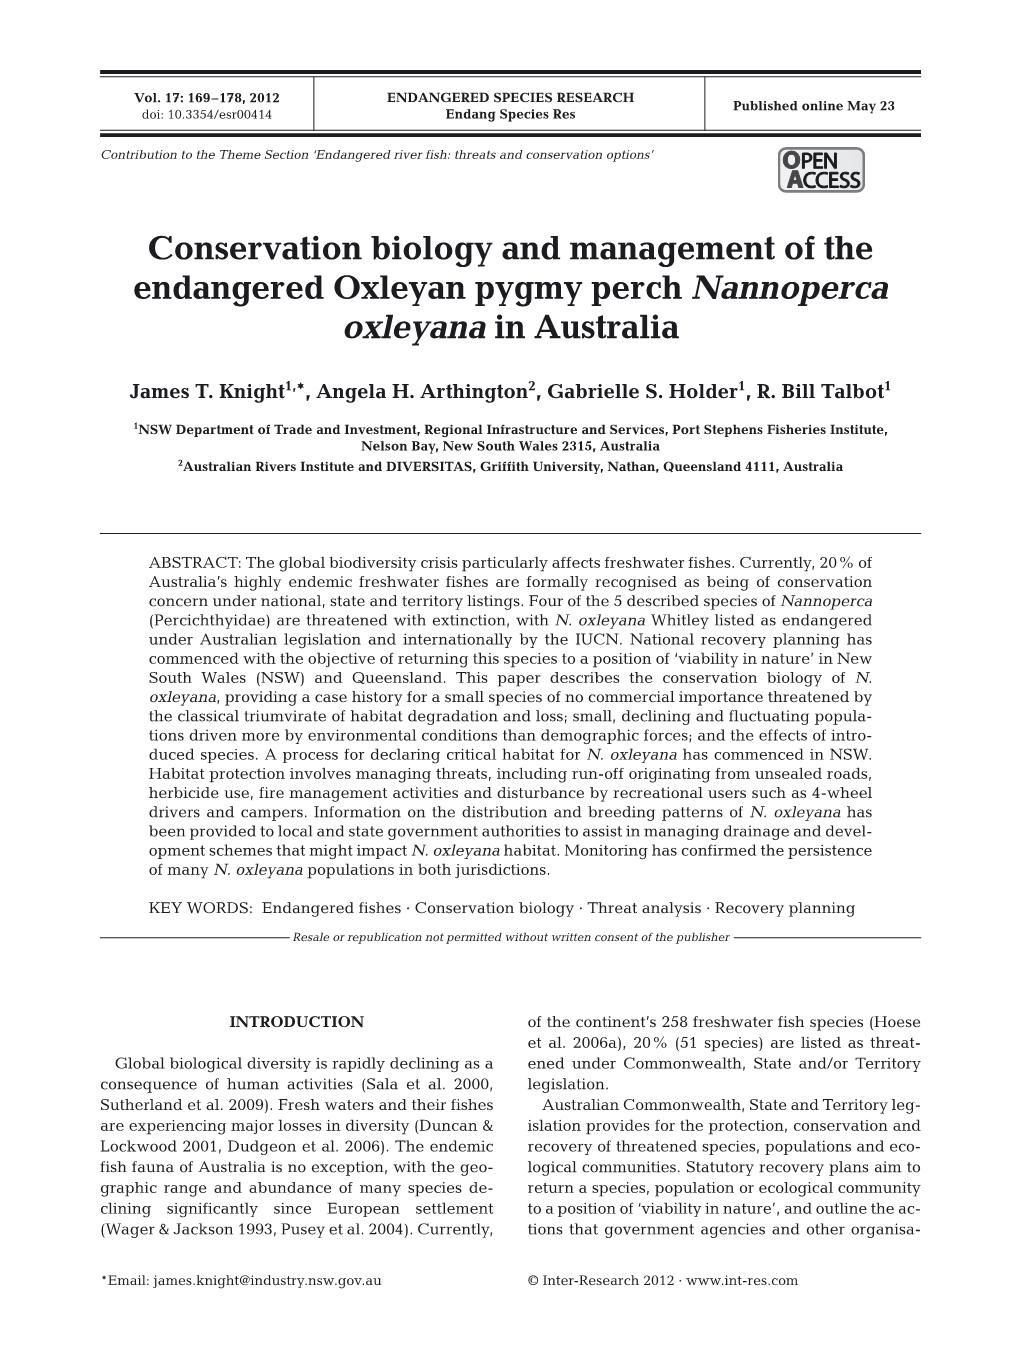 Conservation Biology and Management of the Endangered Oxleyan Pygmy Perch Nannoperca Oxleyana in Australia